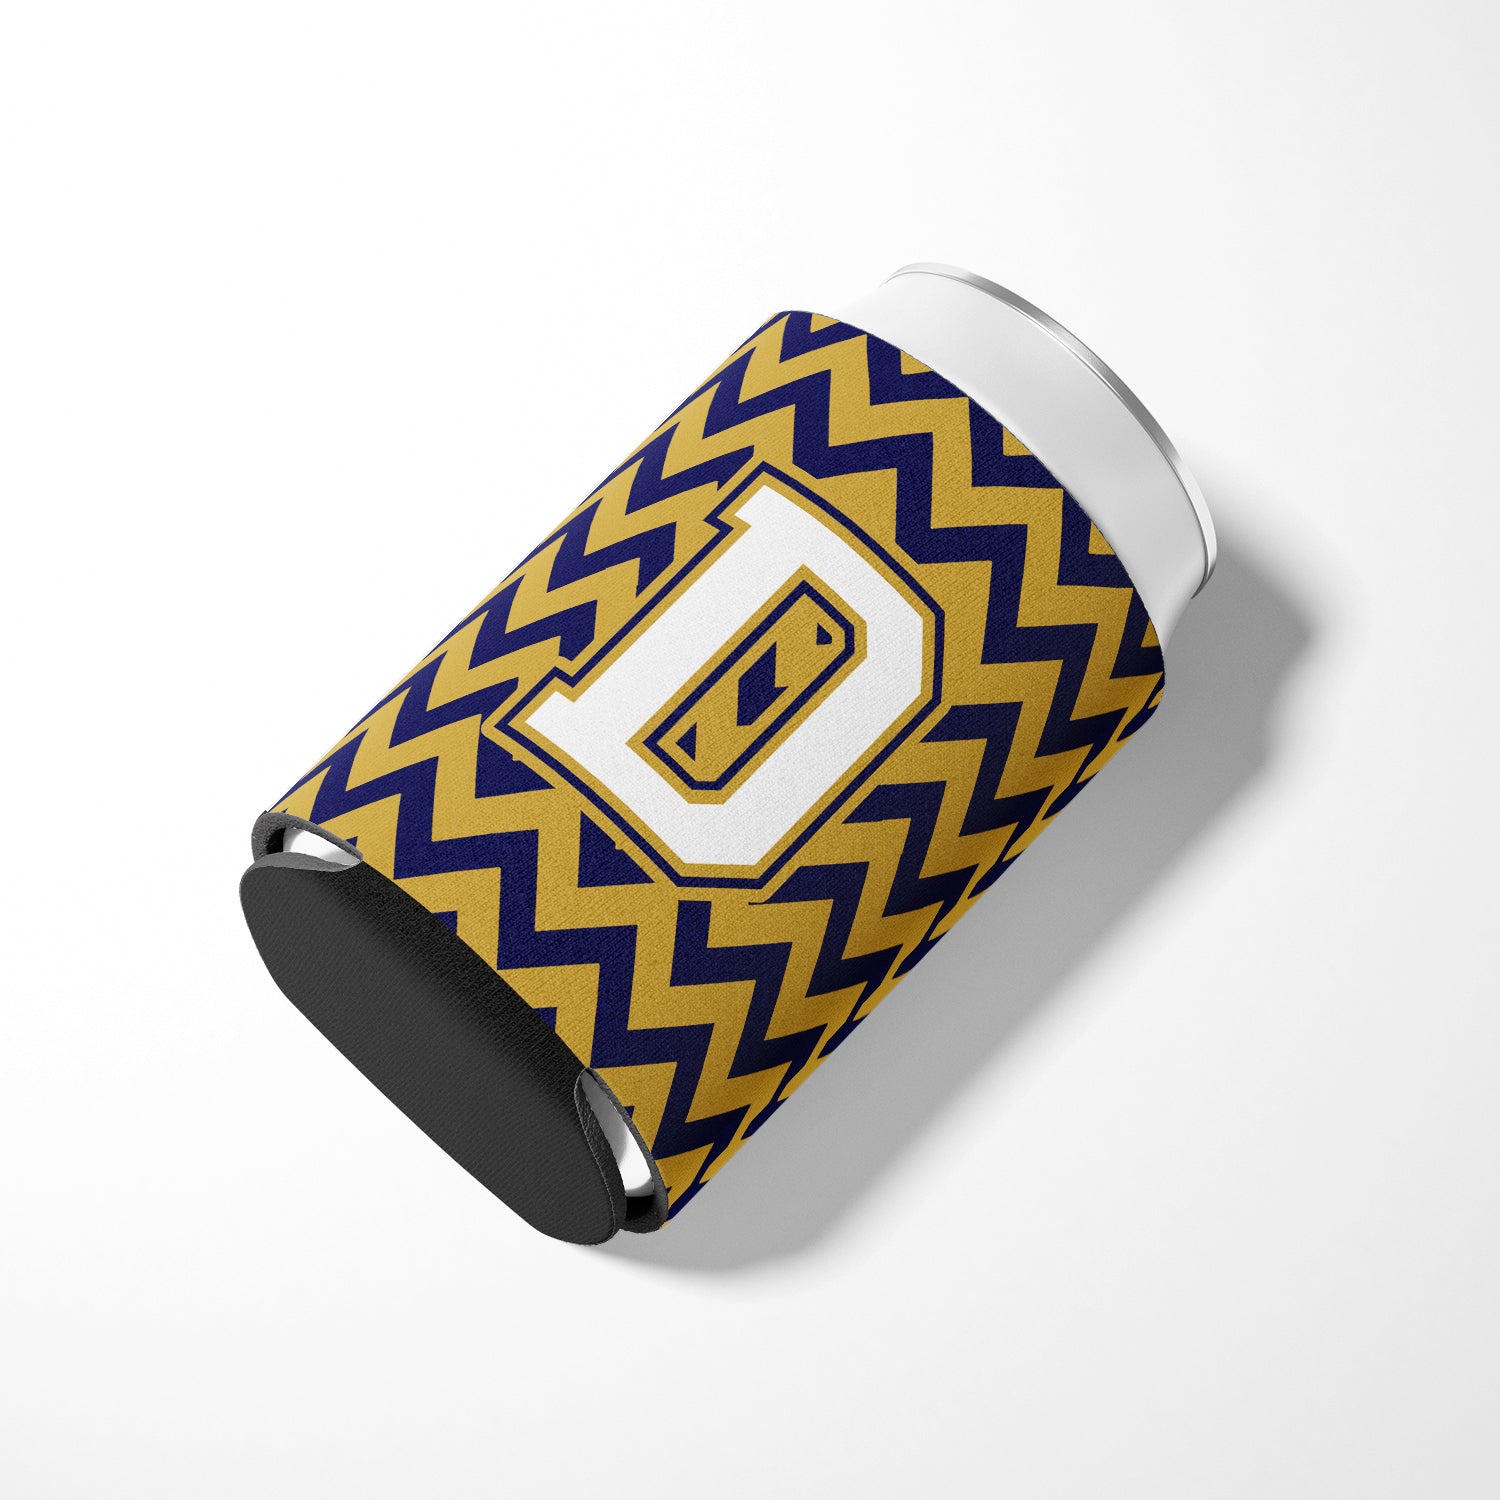 Letter D Chevron Navy Blue and Gold Can or Bottle Hugger CJ1057-DCC.